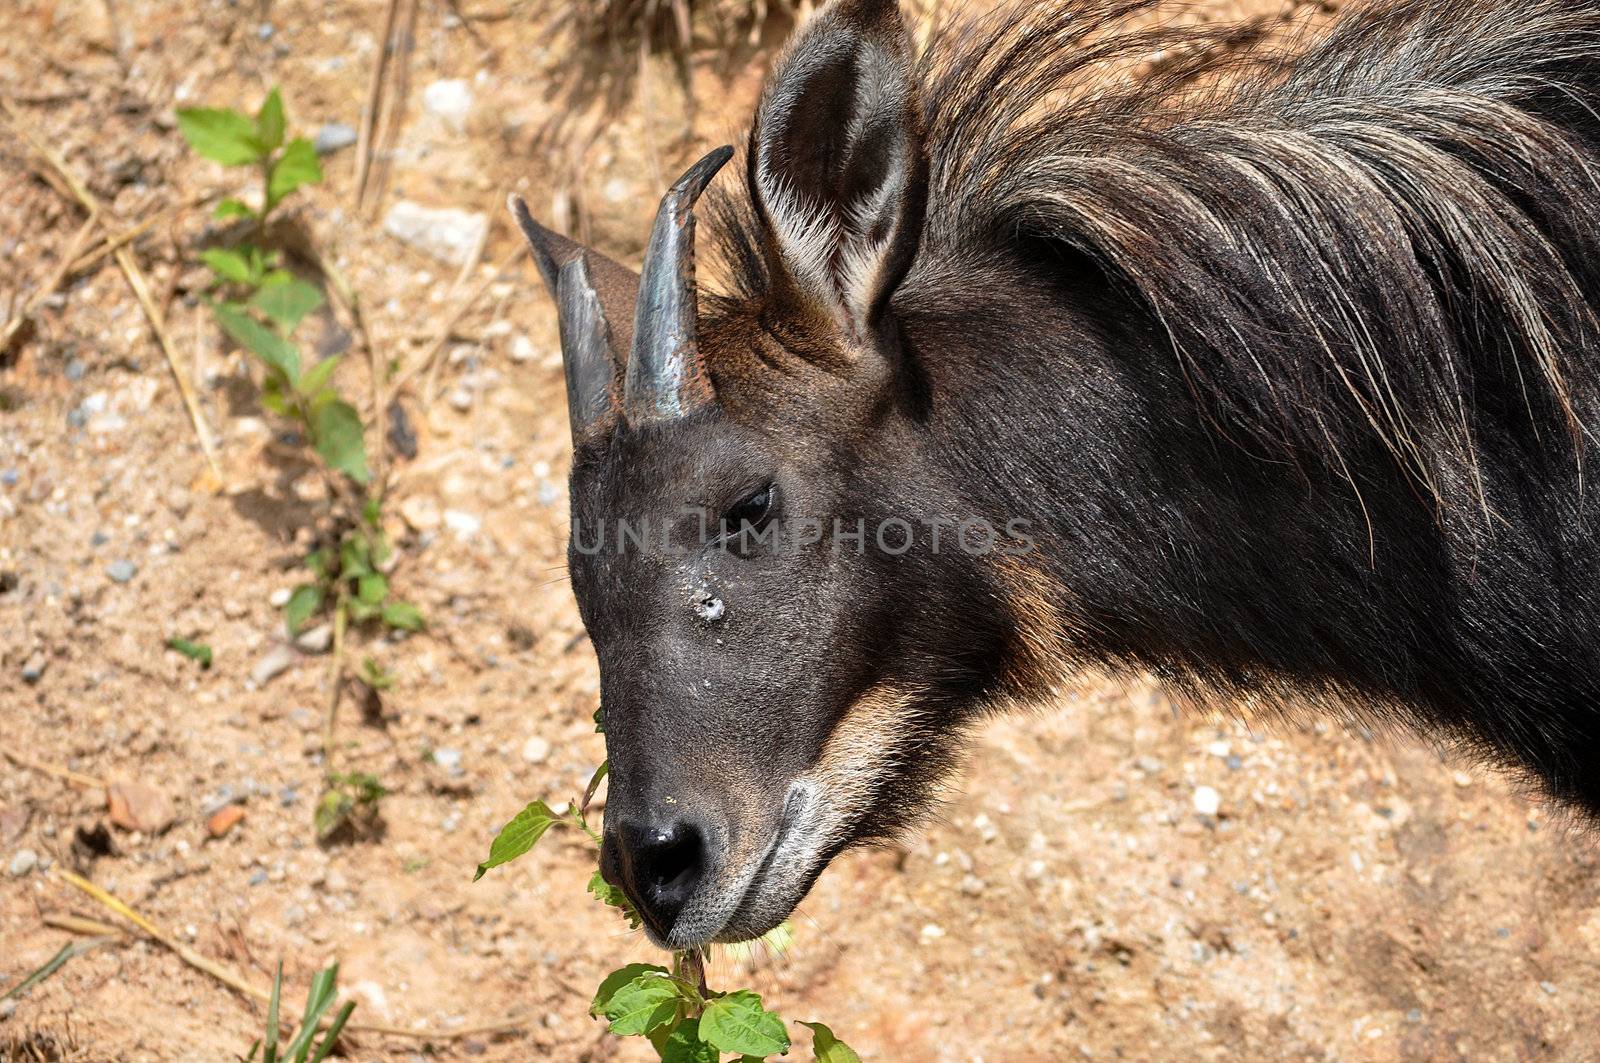 The Sumatran Serow is threatened due to habitat loss and hunting, leading to it being evaluated as vulnerable by the IUCN.